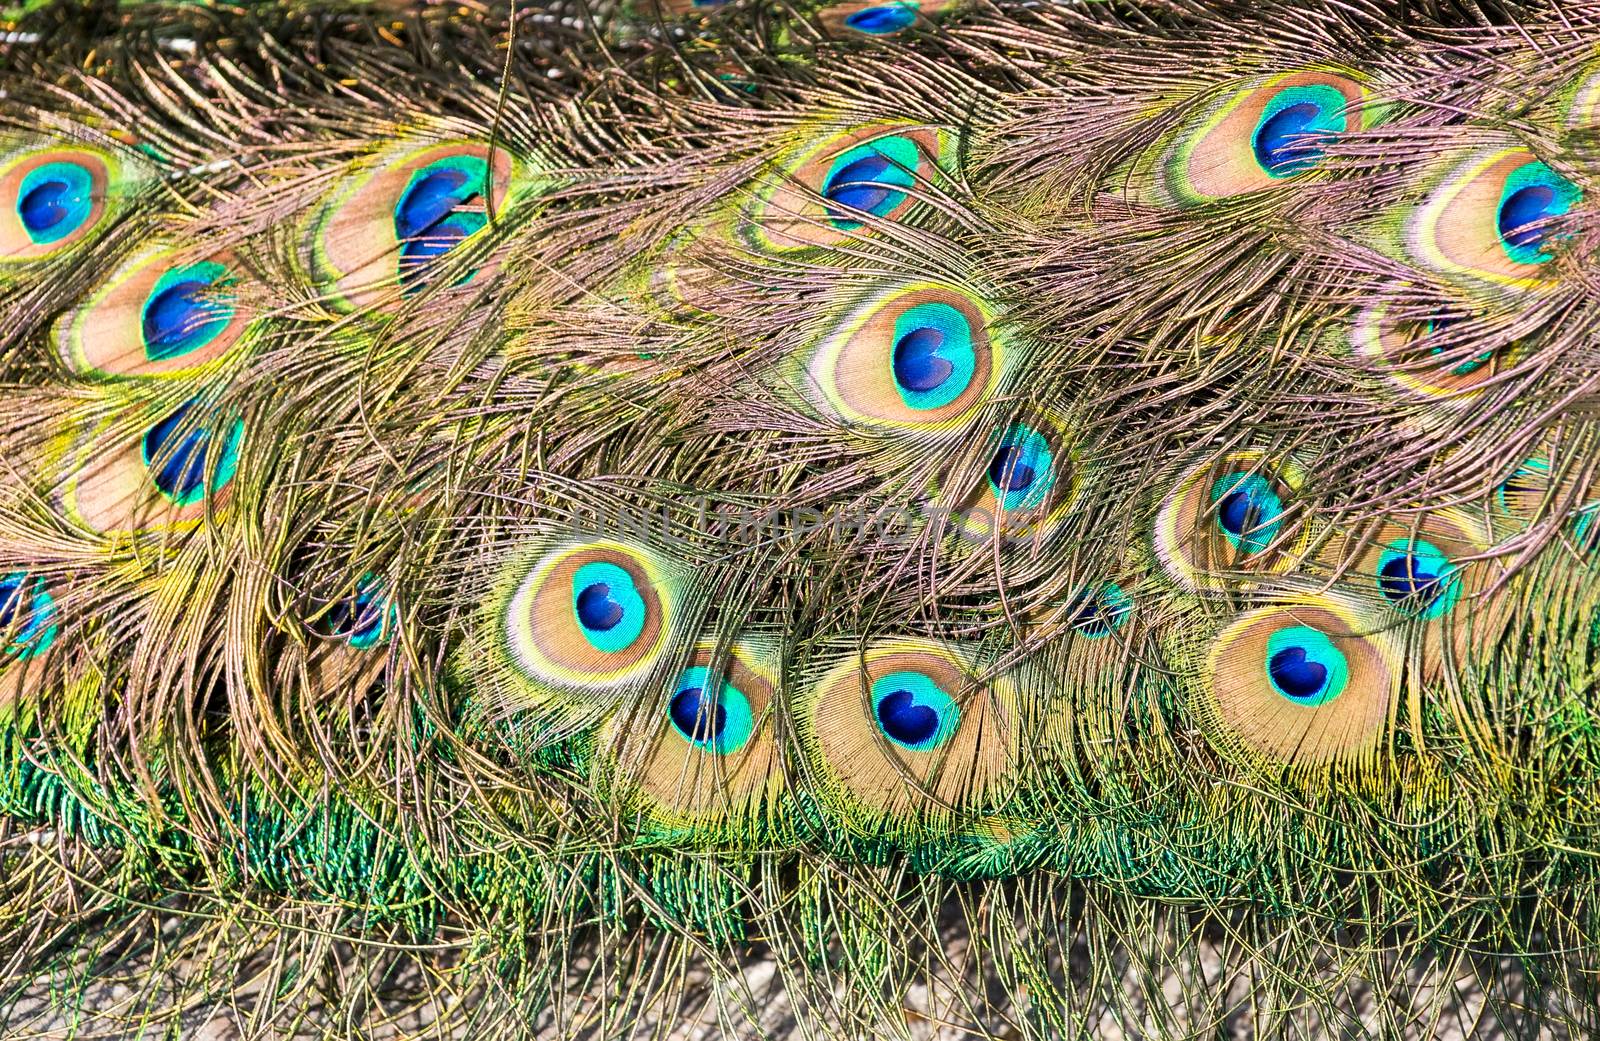 Tail feathers of male peacock with colorful eyes